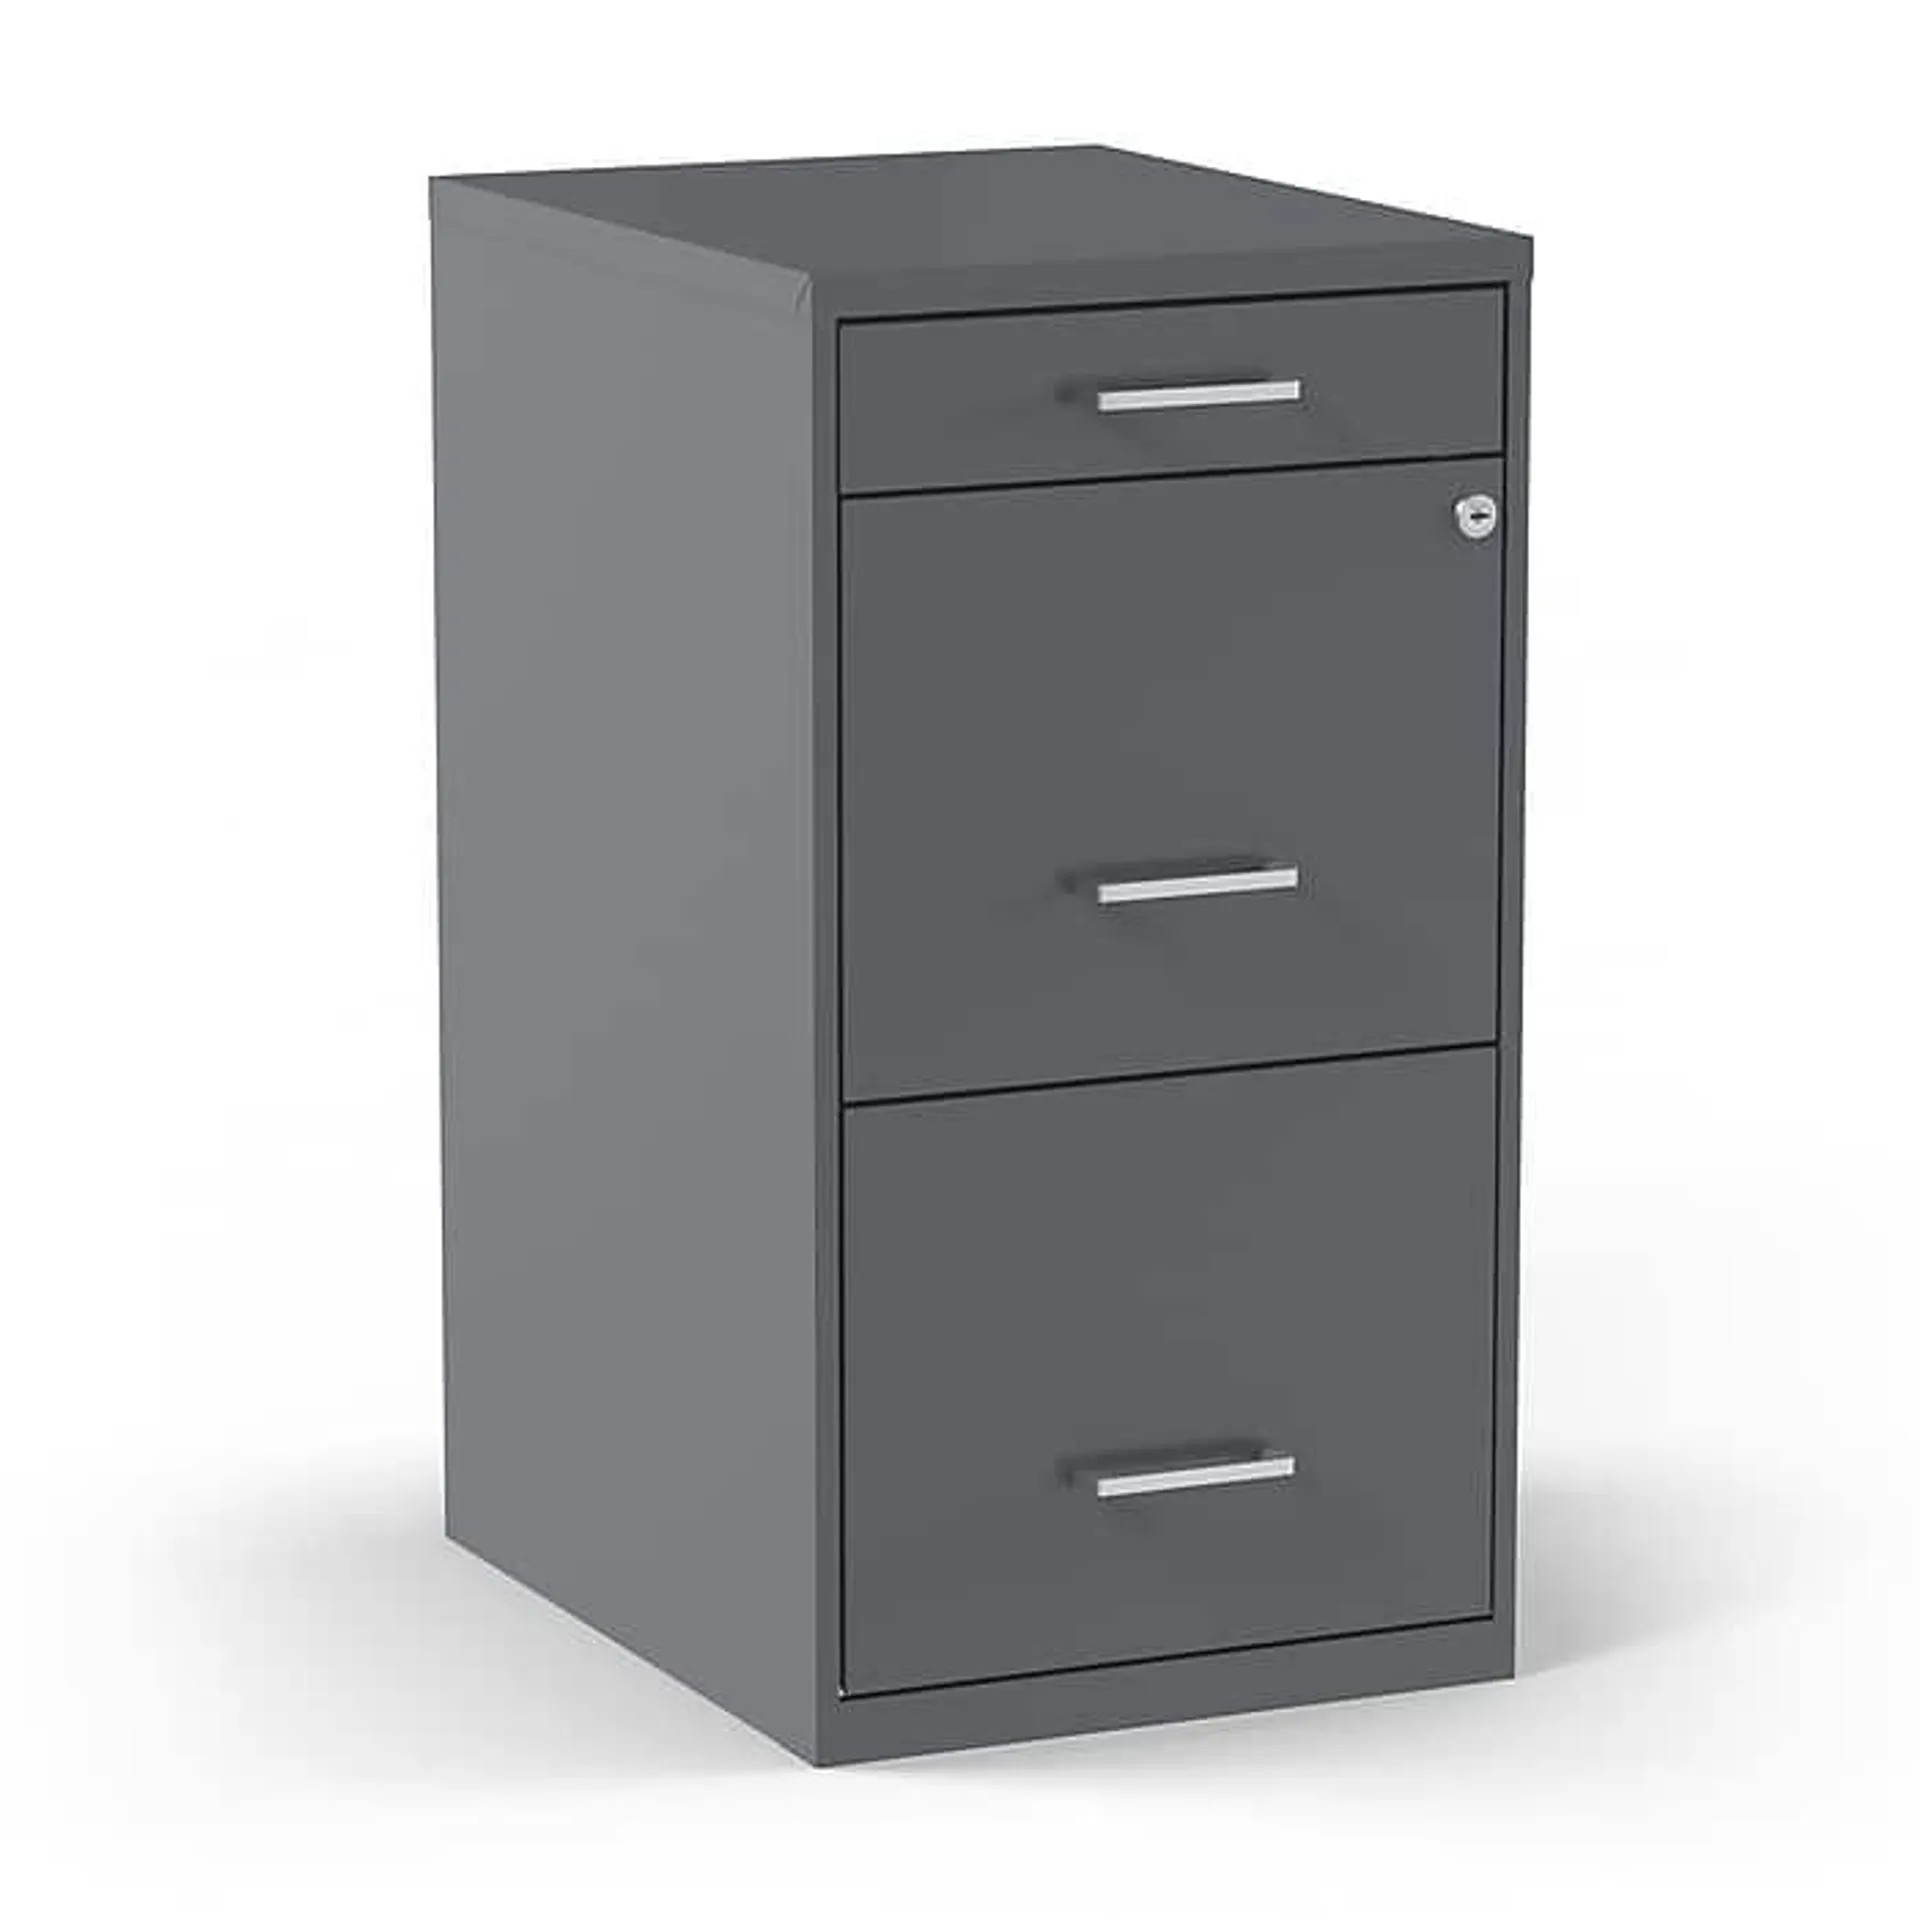 Staples 3-Drawer Vertical File Cabinet,